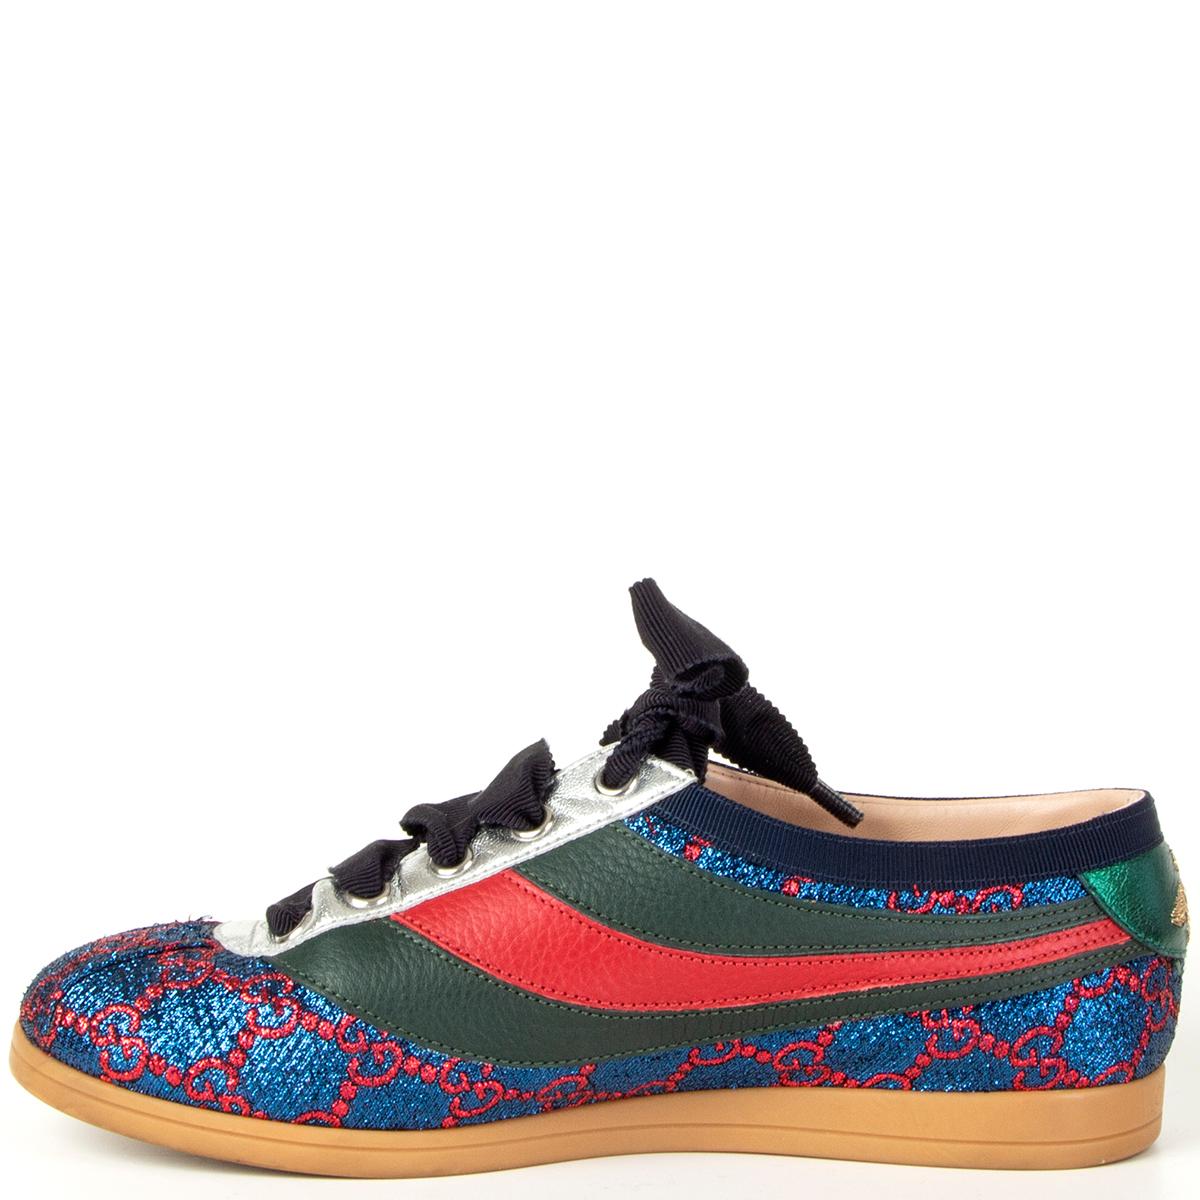 Black GUCCI metallic blue & red FALACER LUREX WEB Sneakers Shoes 35.5 For Sale